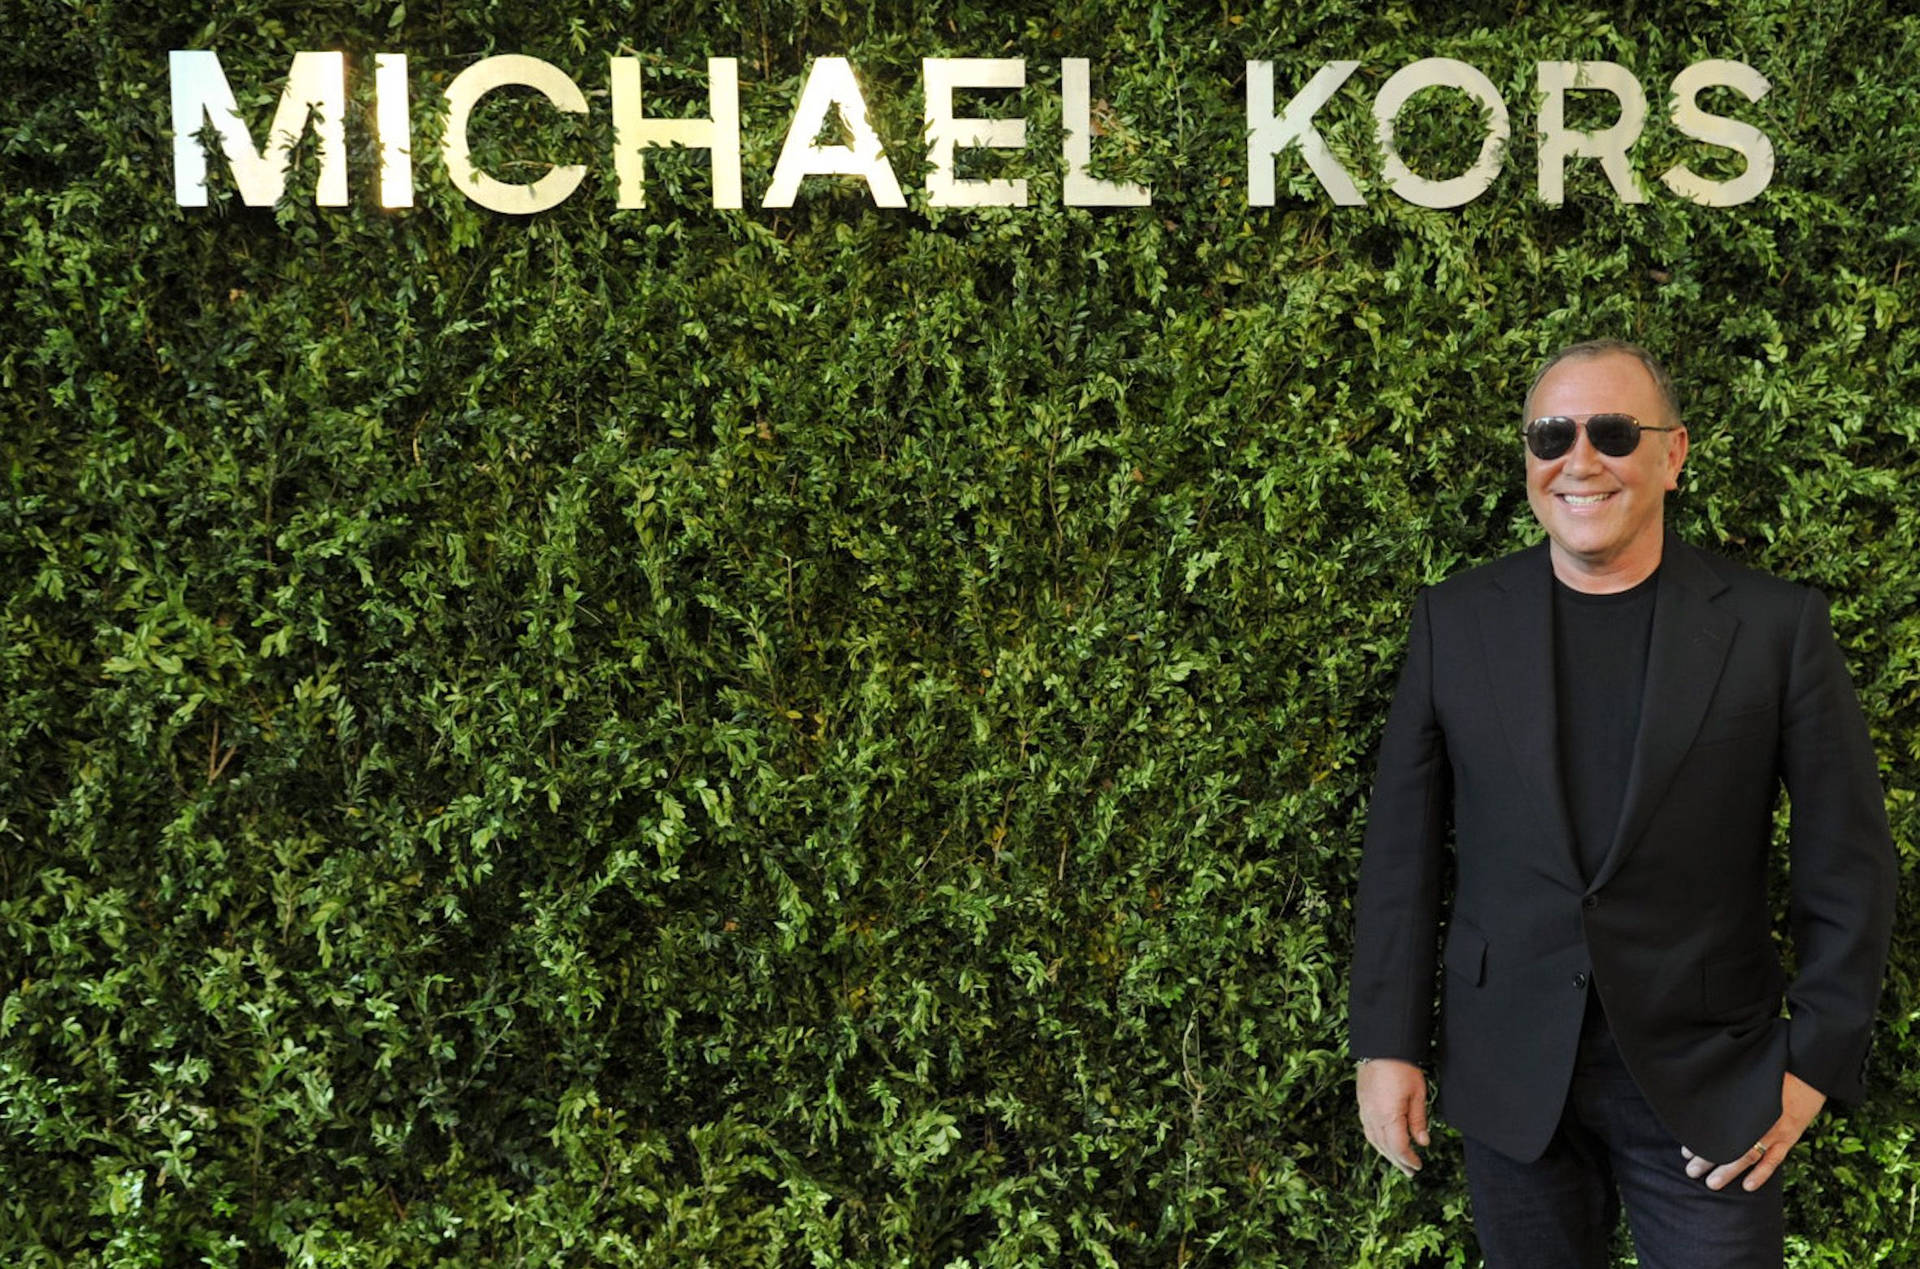 Michael Kors 2362X1561 Wallpaper and Background Image